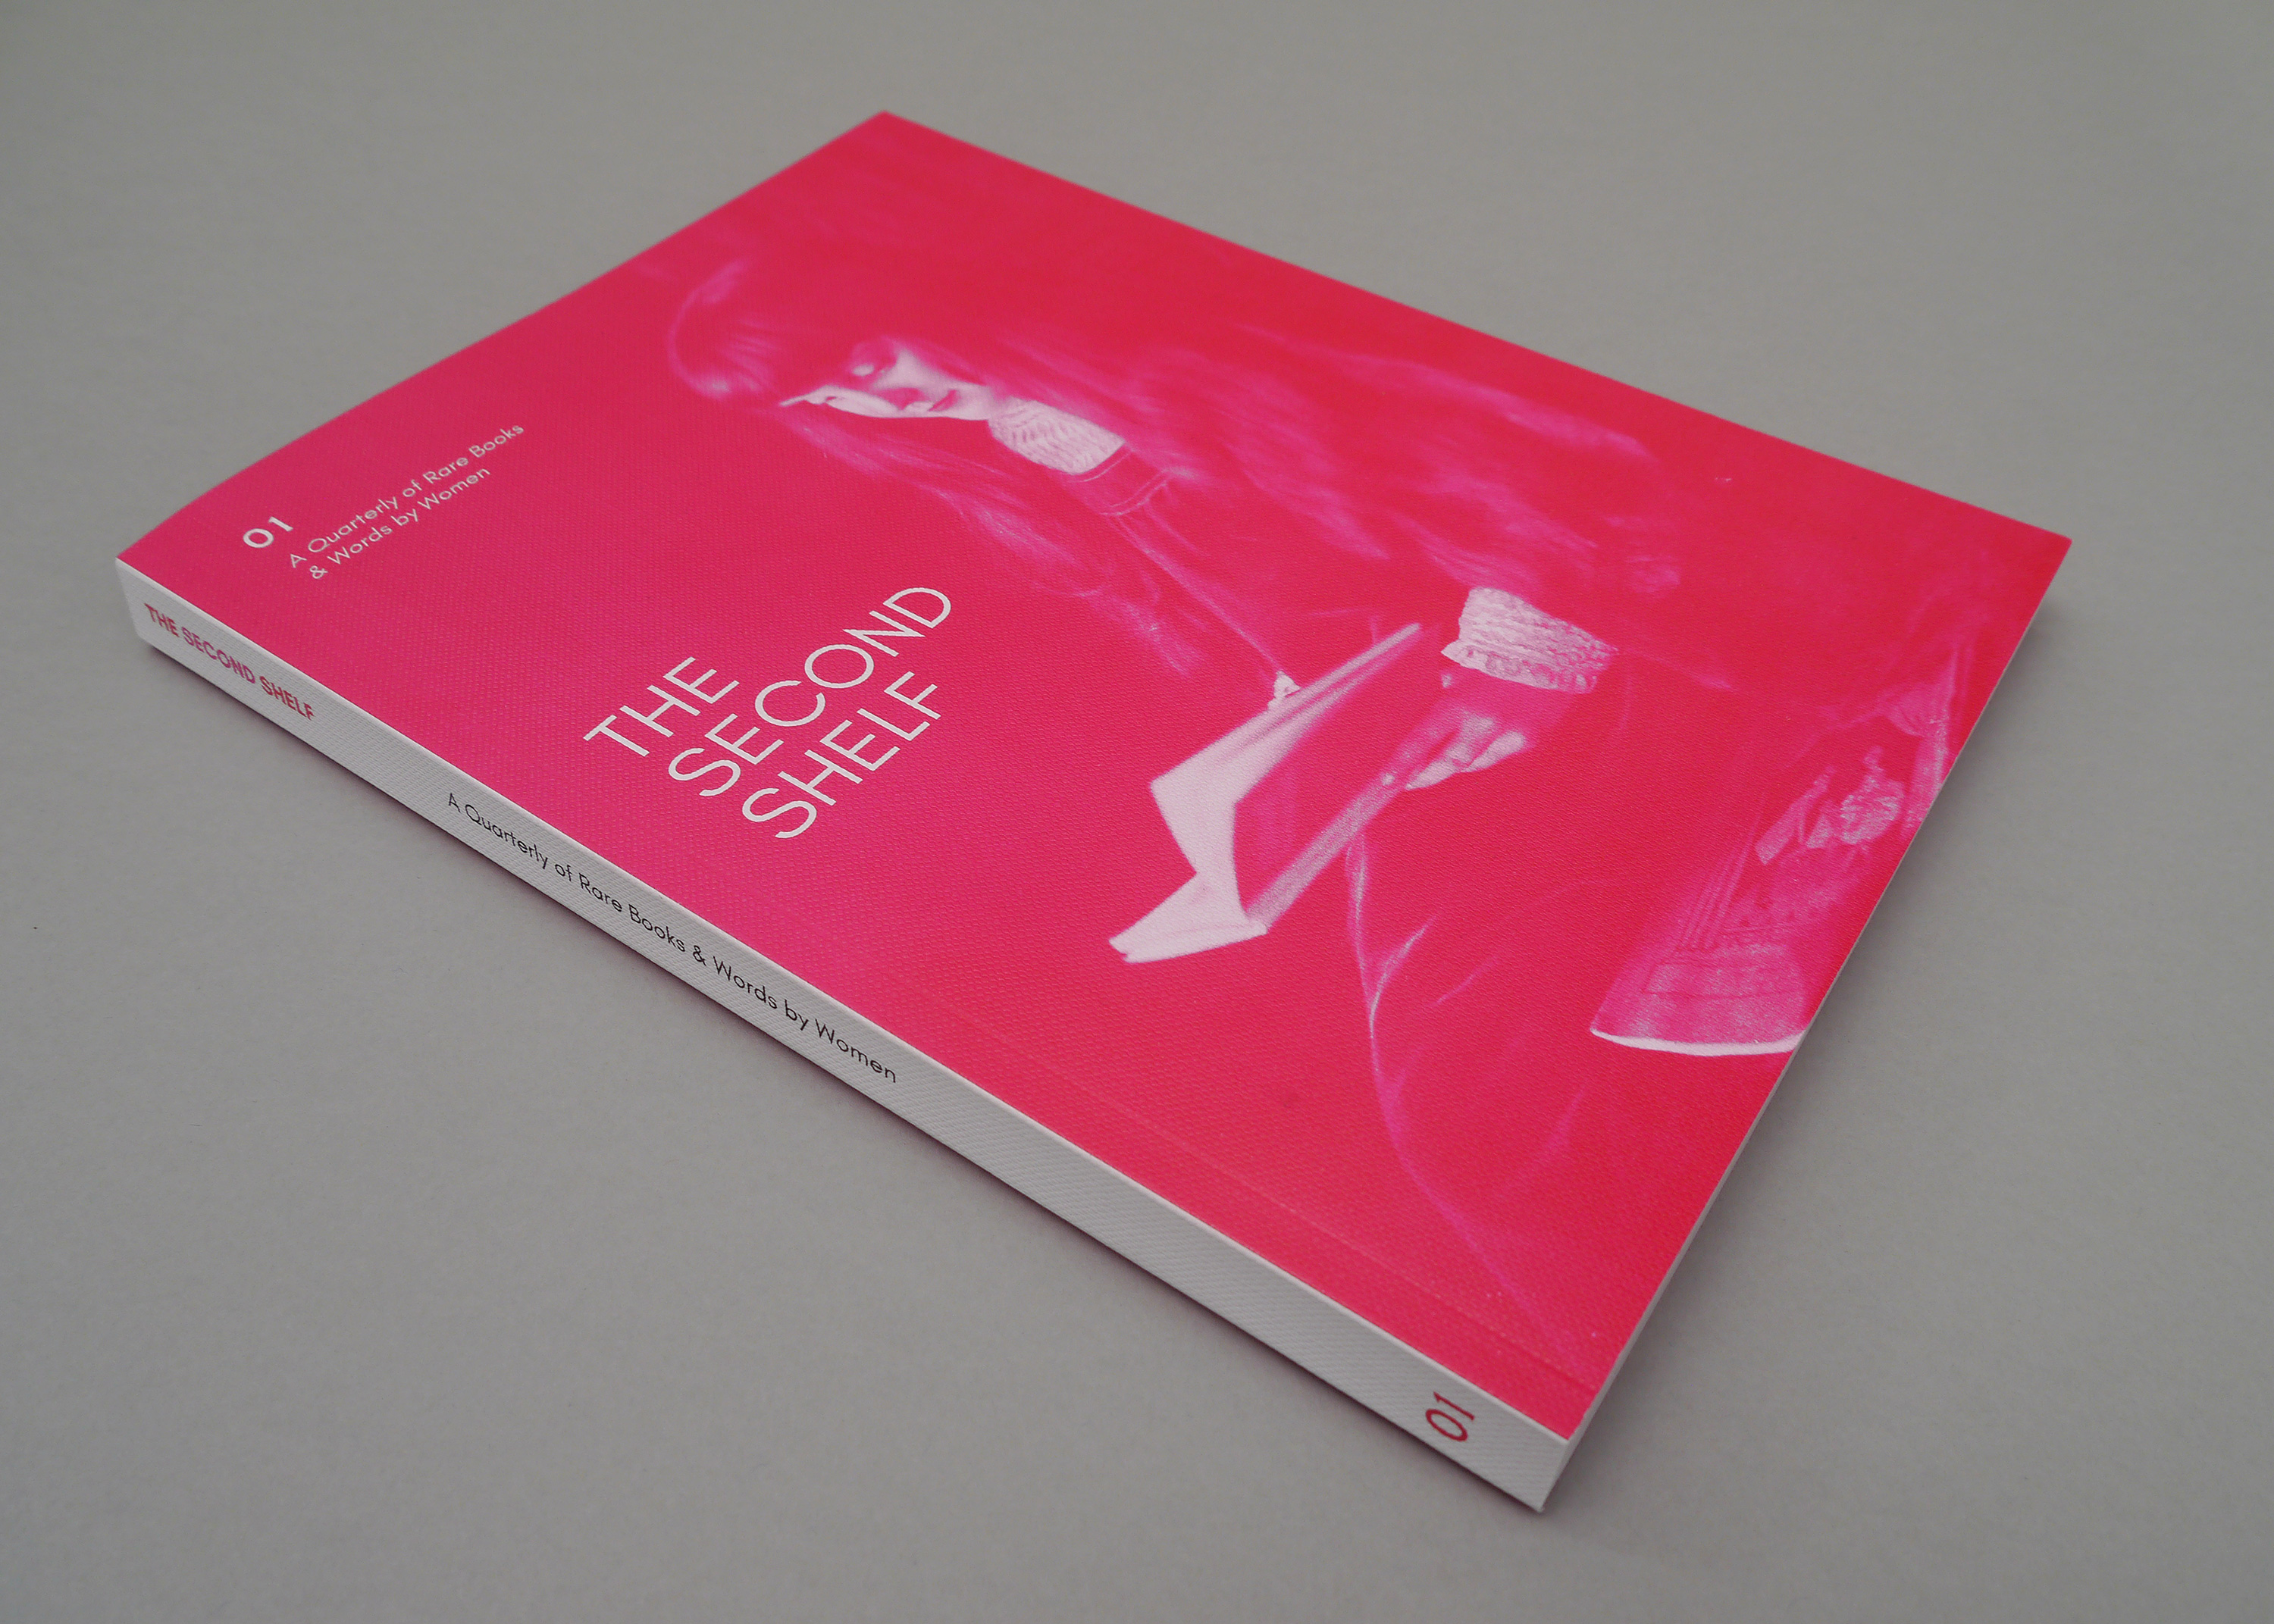 Bright pink portrait format booklet with embossed cover